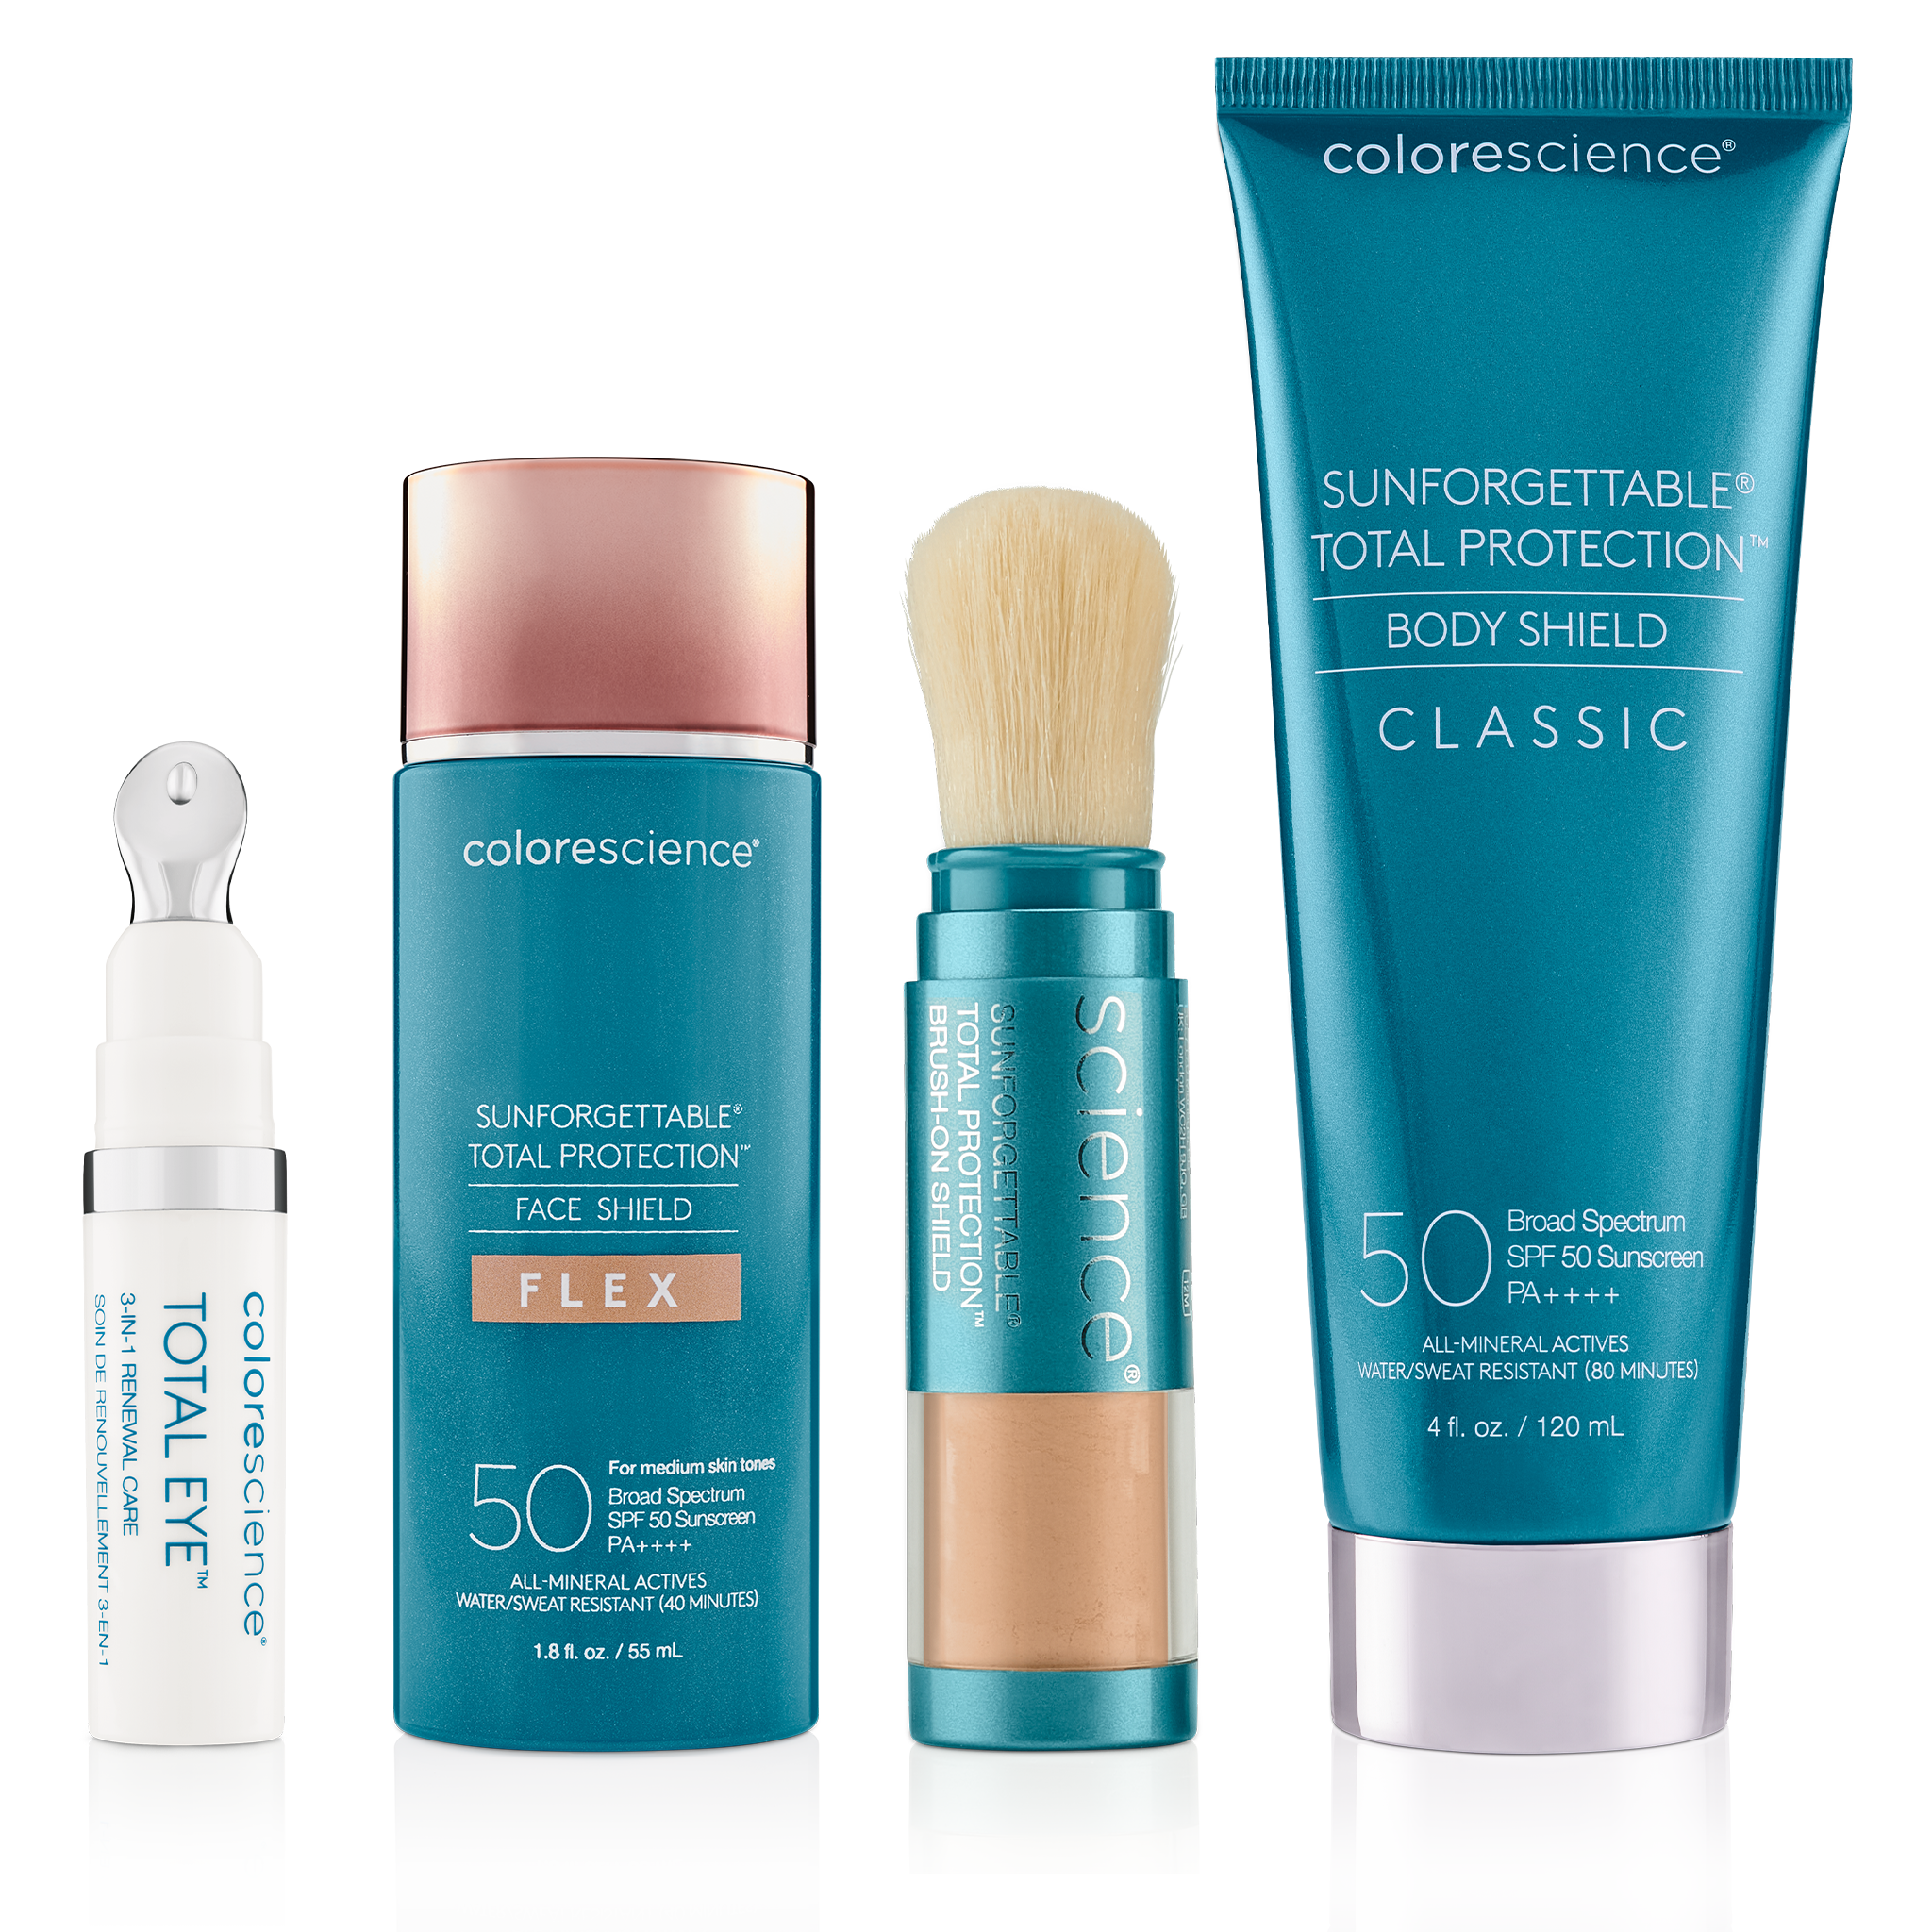 Sun Season Essentials: Total Eye® 3-In-1 Renewal Therapy SPF 35, Sunforgettable® Total Protection™ Face Shield Flex SPF 50, Sunforgettable® Total Protection™ Brush-On Shield SPF 50, Sunforgettable® Total Protection™ Body Shield Classic SPF 50 || all